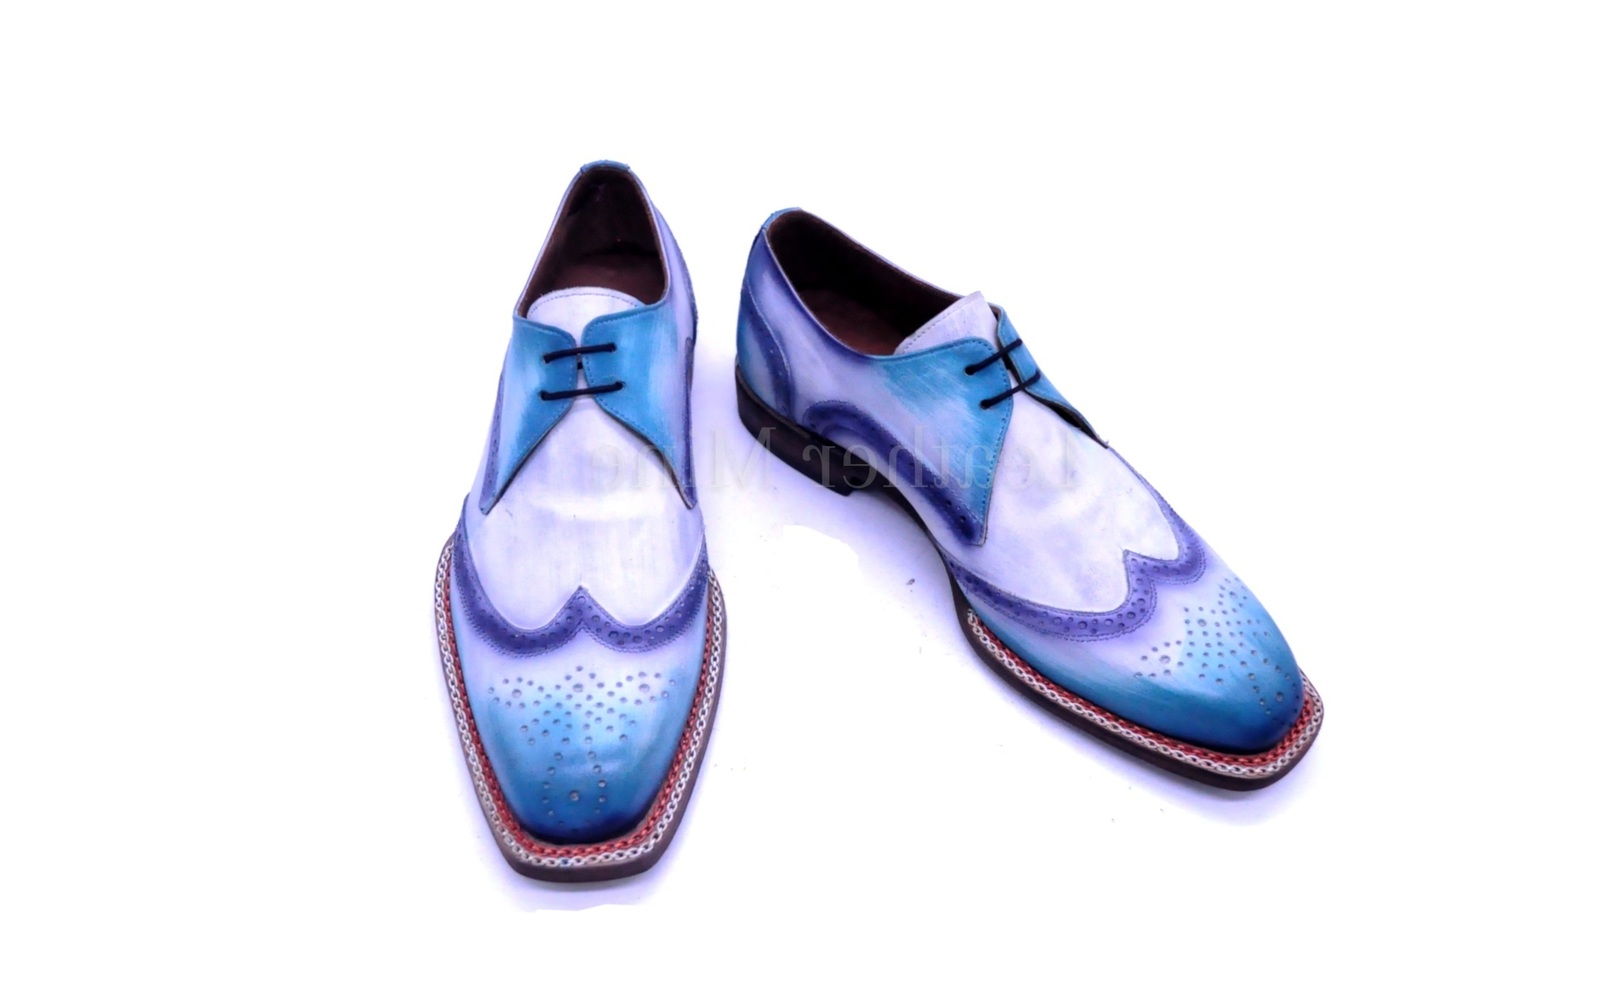 Wingtip Patina Oxfords Dress Shoes For Men, Genuine Leather Custom Shoes